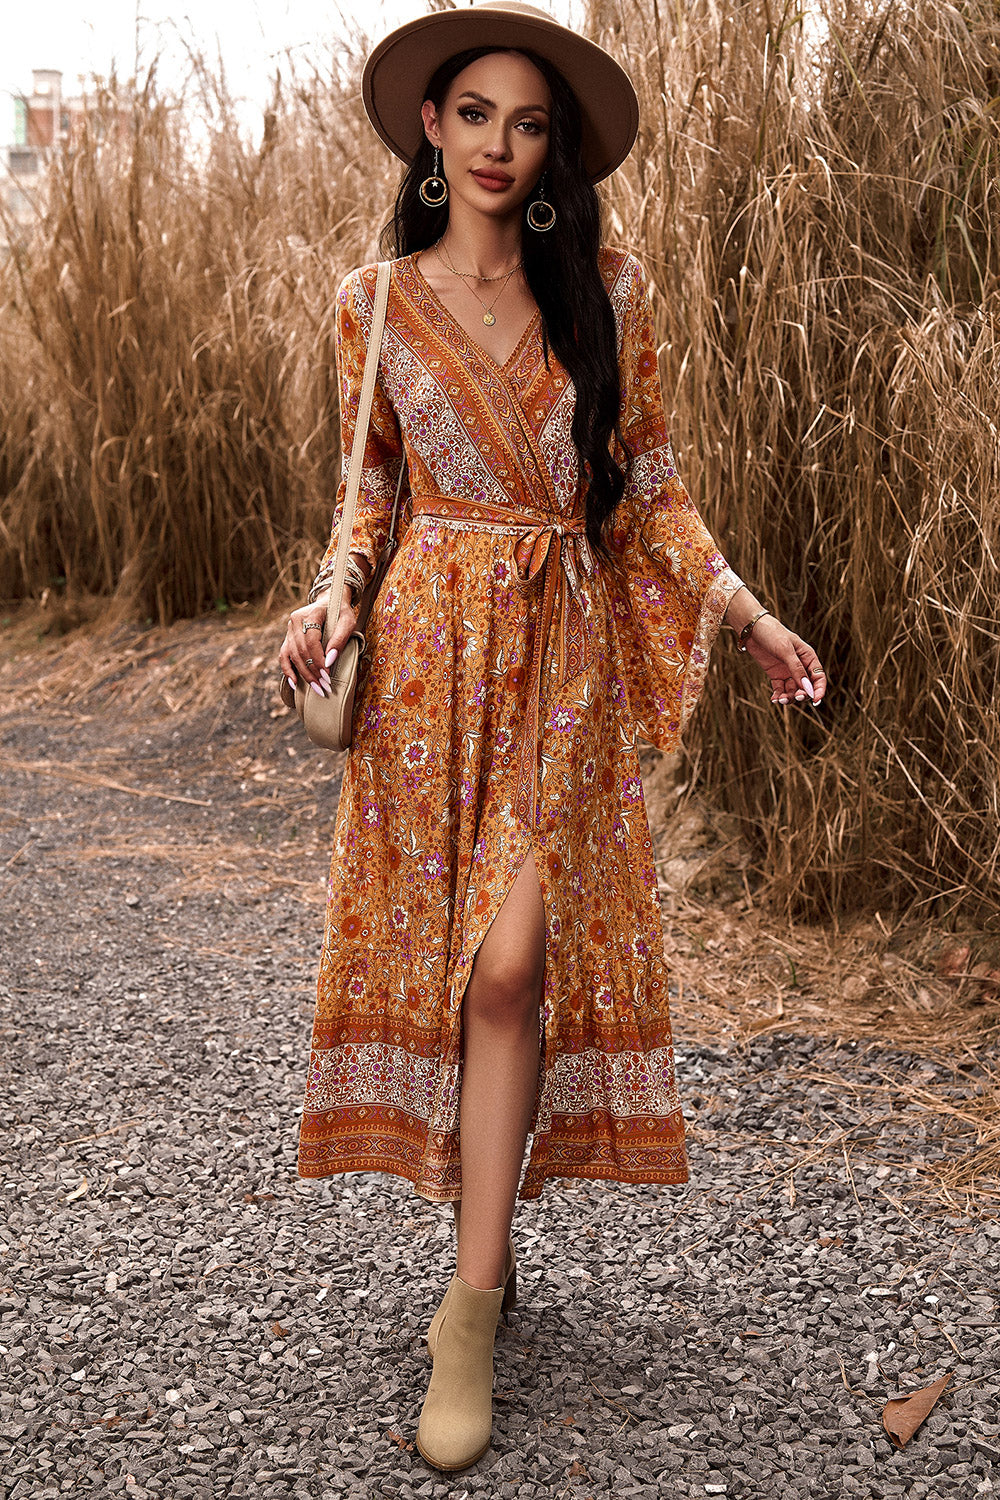 Flowing Boho Maxi Dress featuring a mix of colorful floral designs.